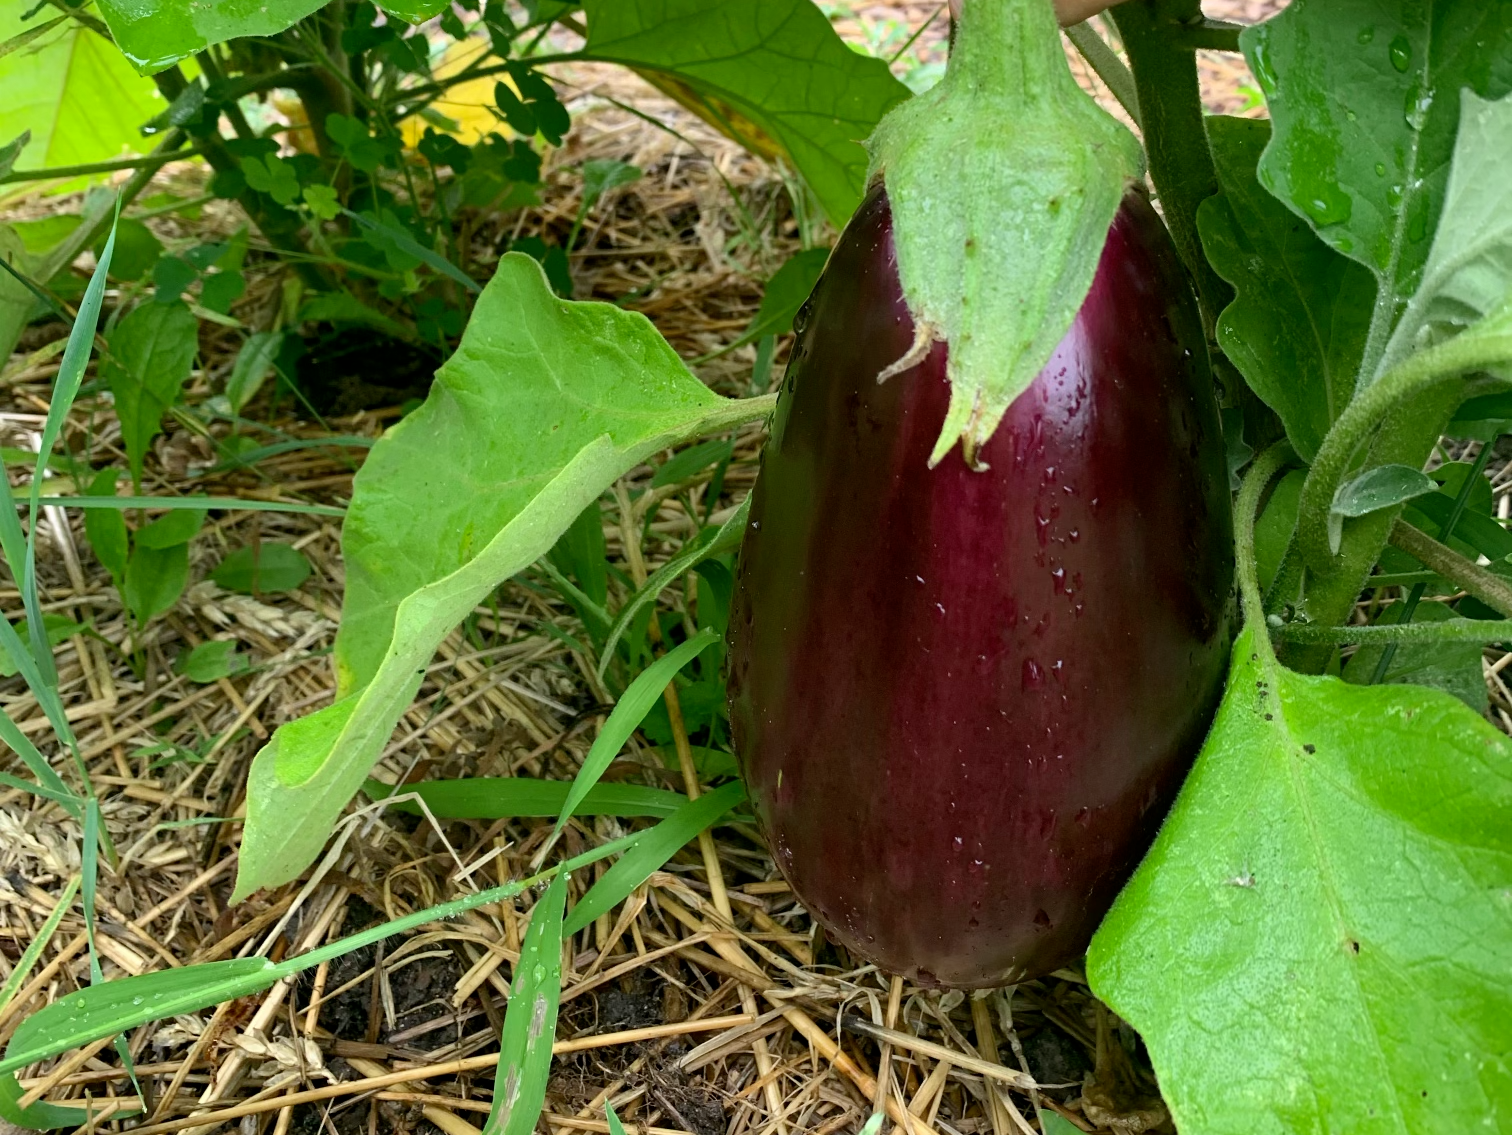 Picture of an eggplant growing in a garden